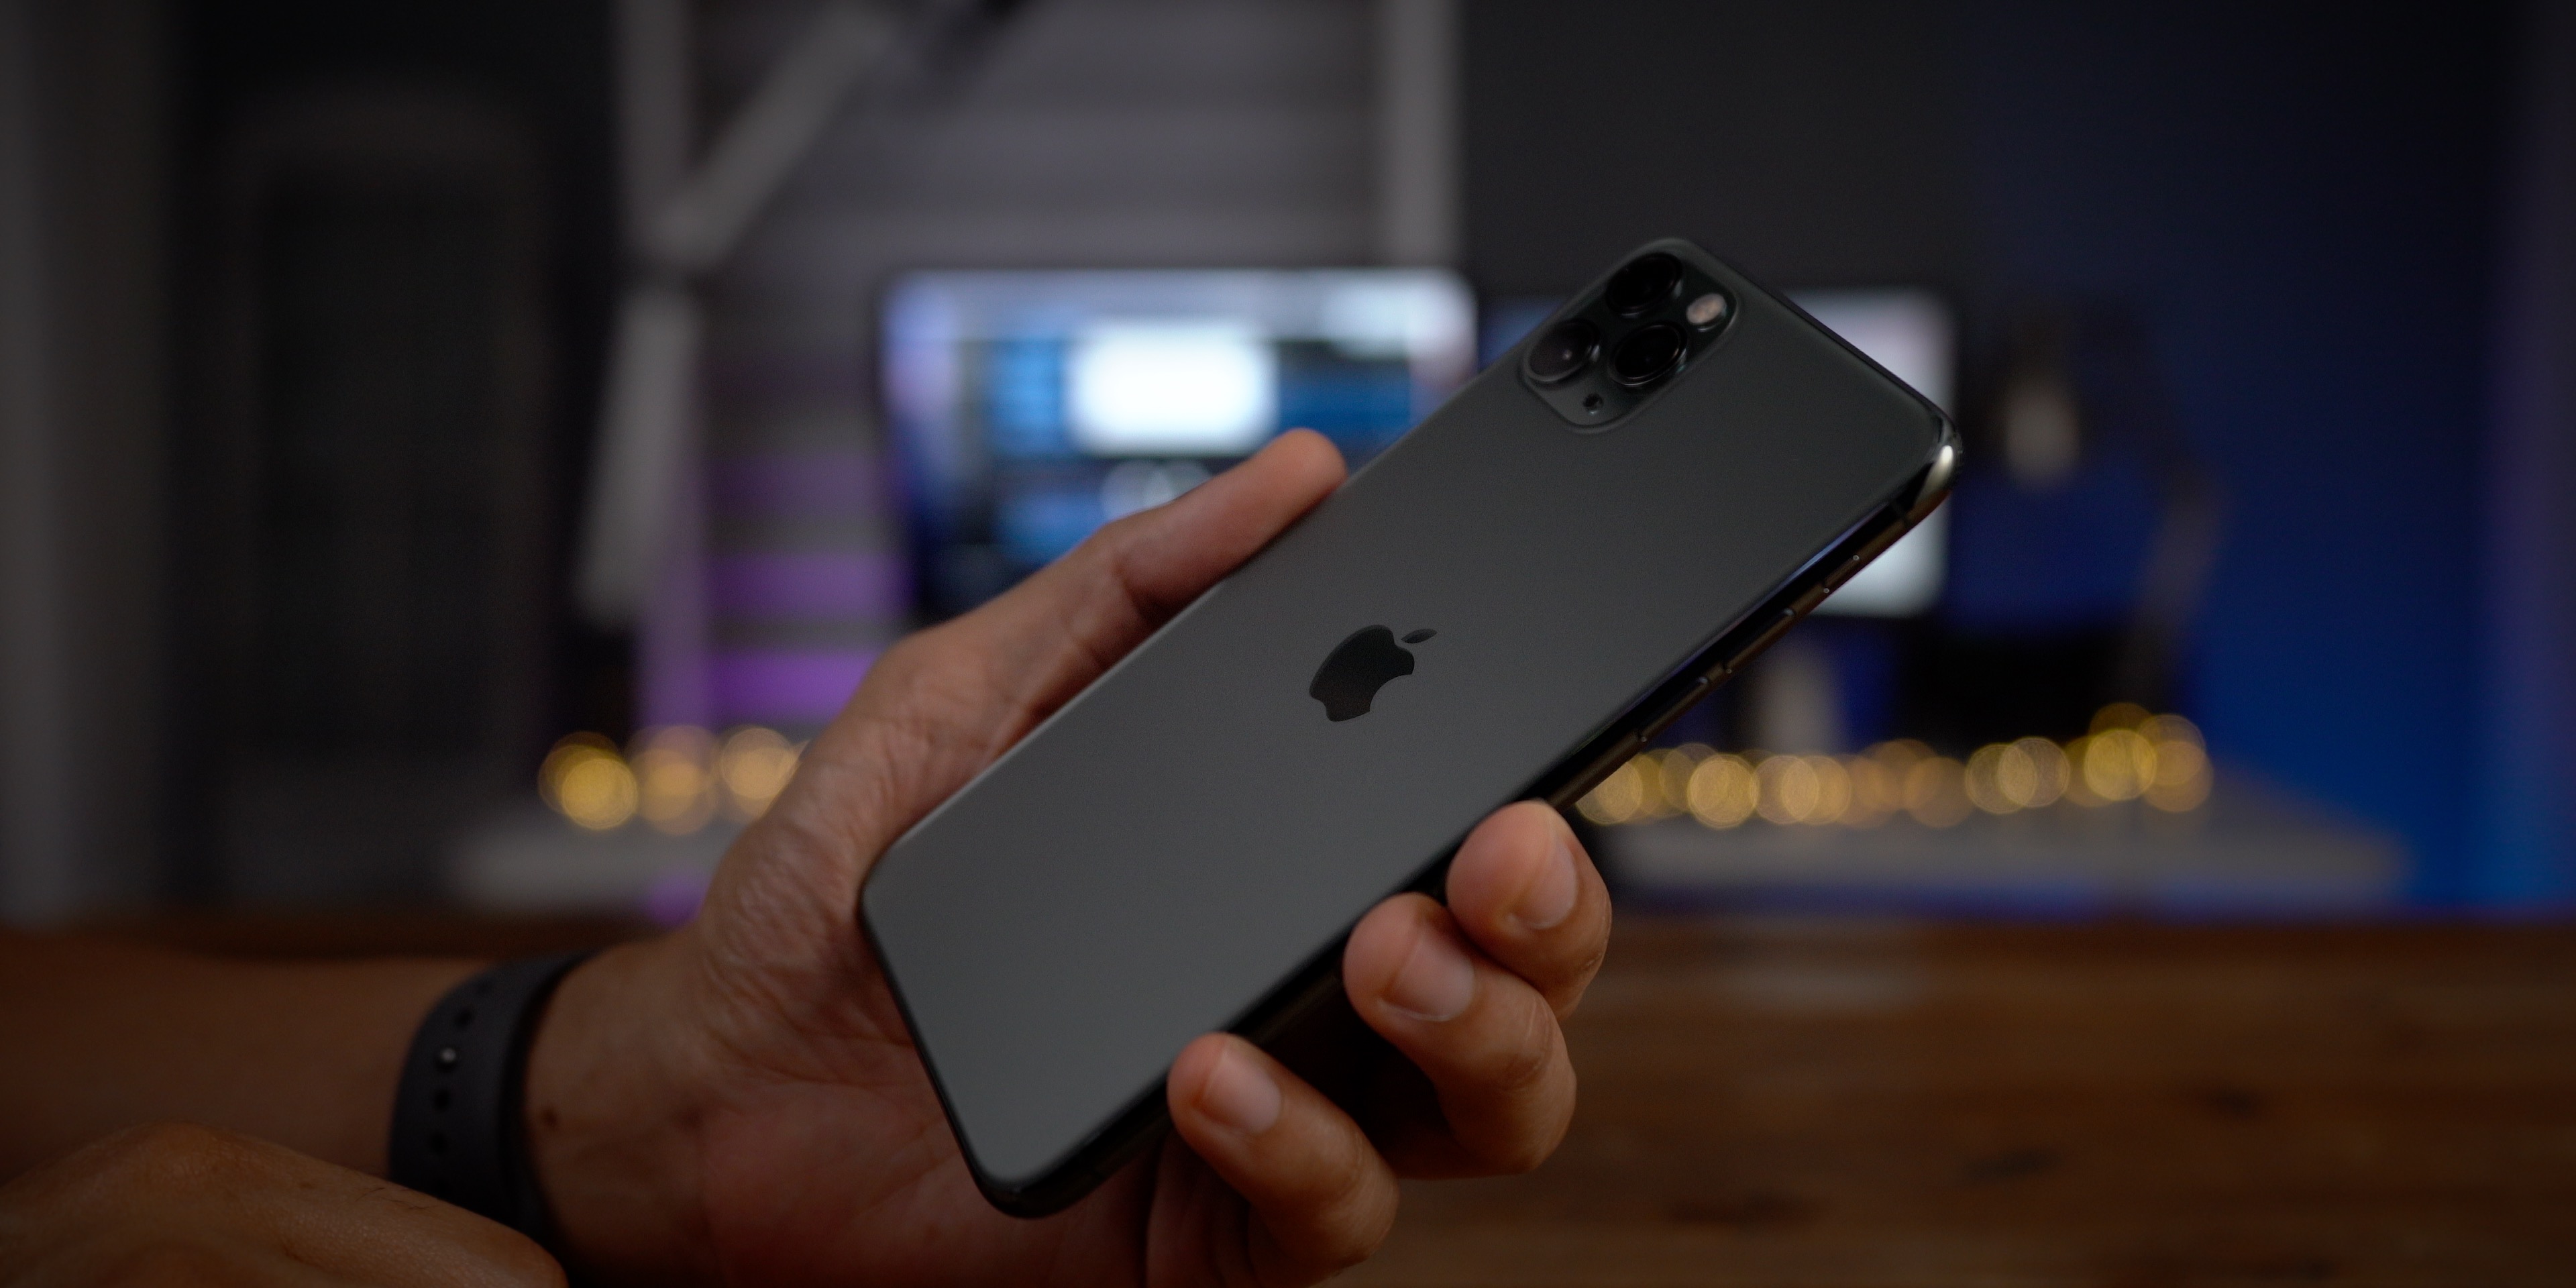 Iphone 11 Pro Review Is It Worth The Significant Price Premium 9to5mac